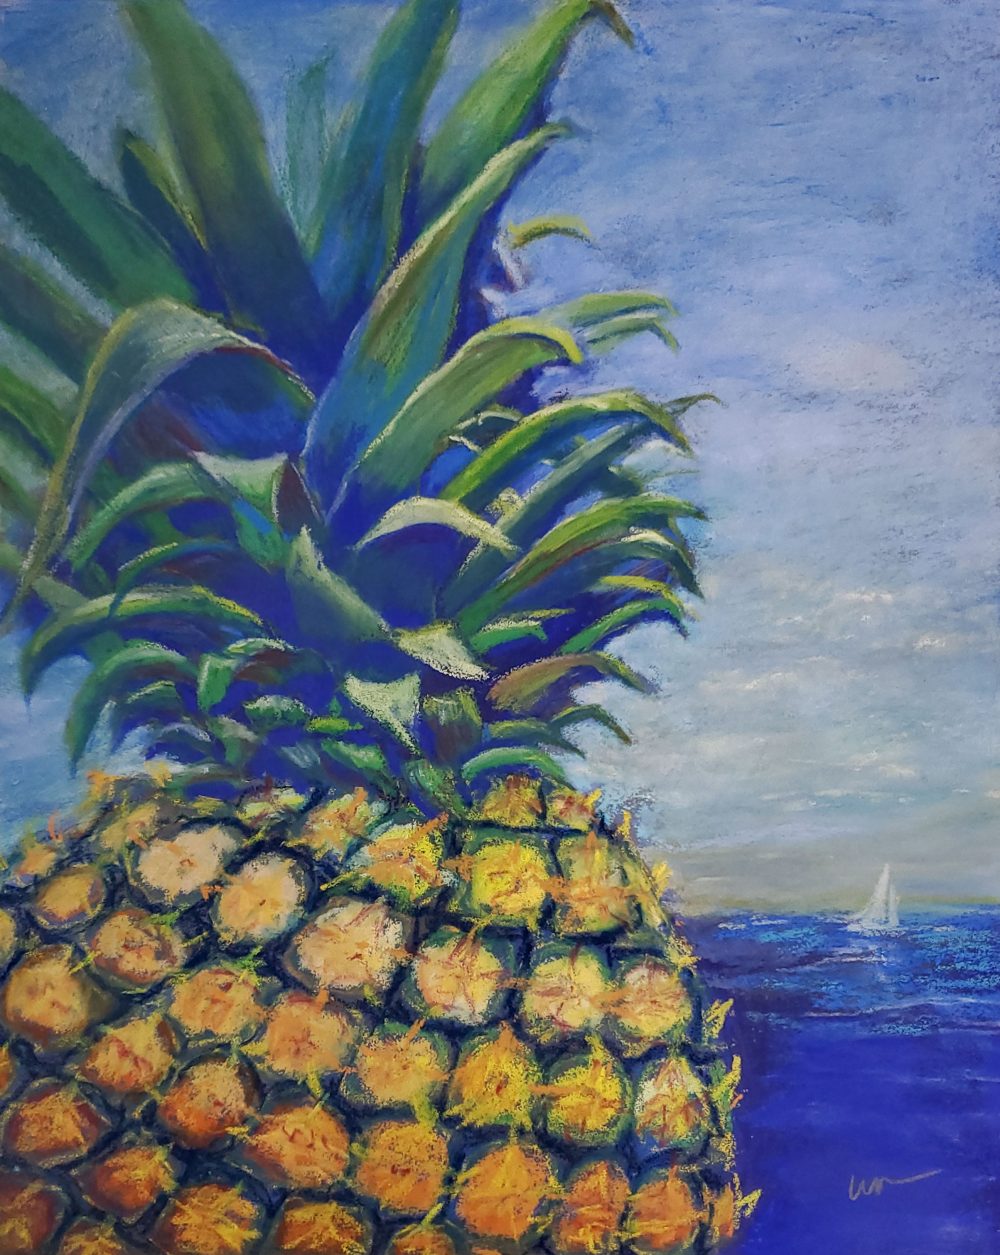 A closeup drawing of a vibrant golden pineapple with green and blue leaves set against a soft, cloudy sky and deep-blue sea with a white sailboat on the distant horizon.